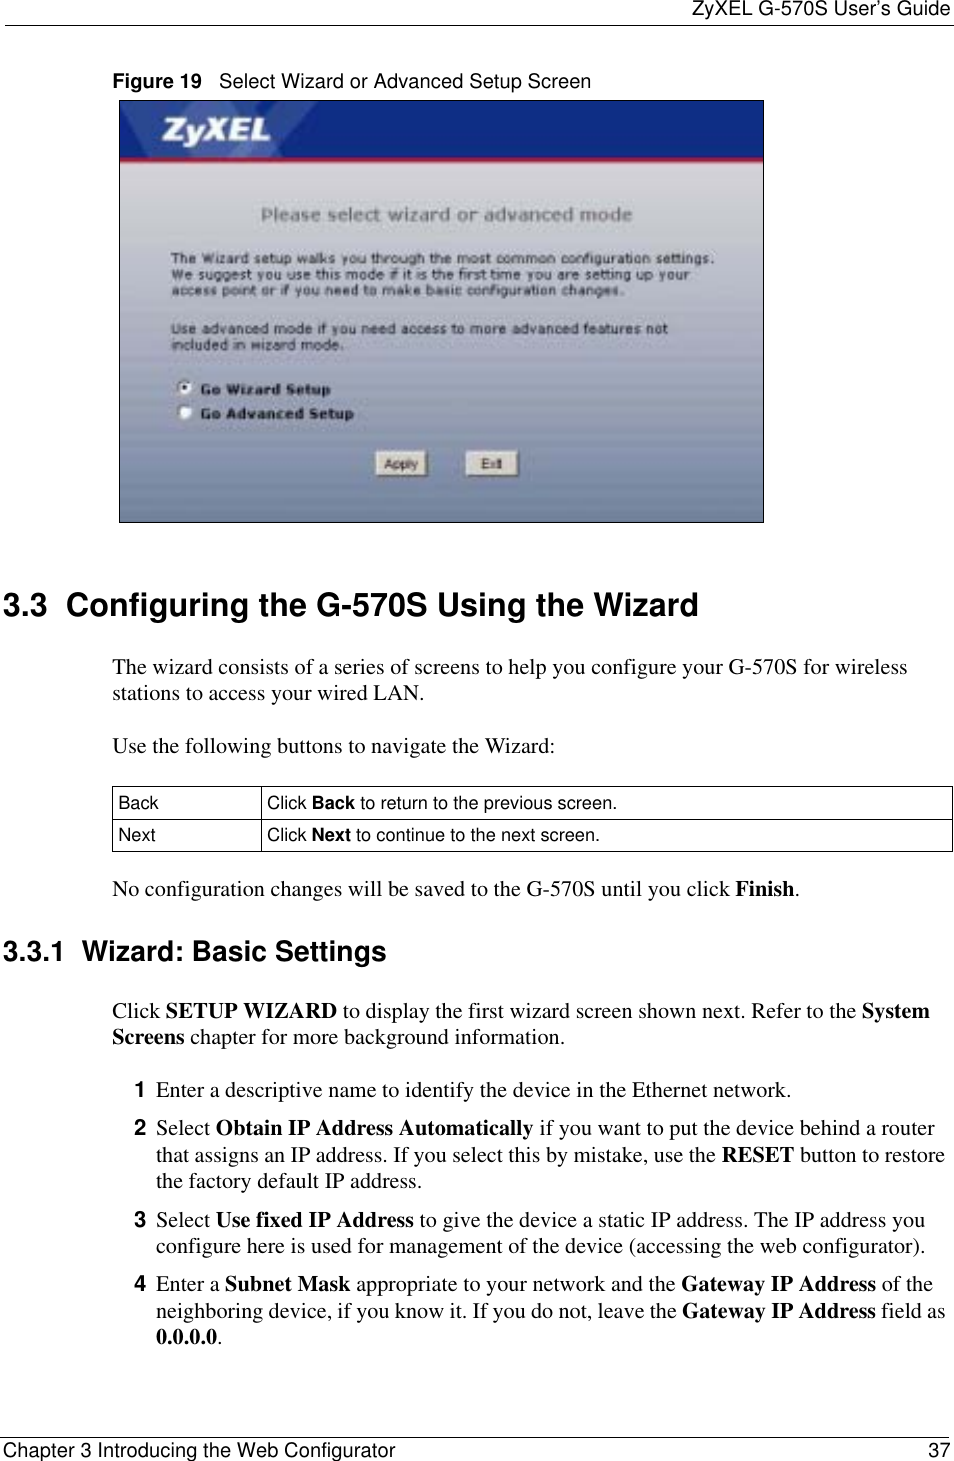 ZyXEL G-570S User’s GuideChapter 3 Introducing the Web Configurator 37Figure 19   Select Wizard or Advanced Setup Screen3.3  Configuring the G-570S Using the WizardThe wizard consists of a series of screens to help you configure your G-570S for wireless stations to access your wired LAN. Use the following buttons to navigate the Wizard:No configuration changes will be saved to the G-570S until you click Finish.3.3.1  Wizard: Basic Settings Click SETUP WIZARD to display the first wizard screen shown next. Refer to the SystemScreens chapter for more background information.1Enter a descriptive name to identify the device in the Ethernet network.2Select Obtain IP Address Automatically if you want to put the device behind a router that assigns an IP address. If you select this by mistake, use the RESET button to restore the factory default IP address. 3Select Use fixed IP Address to give the device a static IP address. The IP address you configure here is used for management of the device (accessing the web configurator).4Enter a Subnet Mask appropriate to your network and the Gateway IP Address of the neighboring device, if you know it. If you do not, leave the Gateway IP Address field as 0.0.0.0.Back Click Back to return to the previous screen.  Next Click Next to continue to the next screen. 